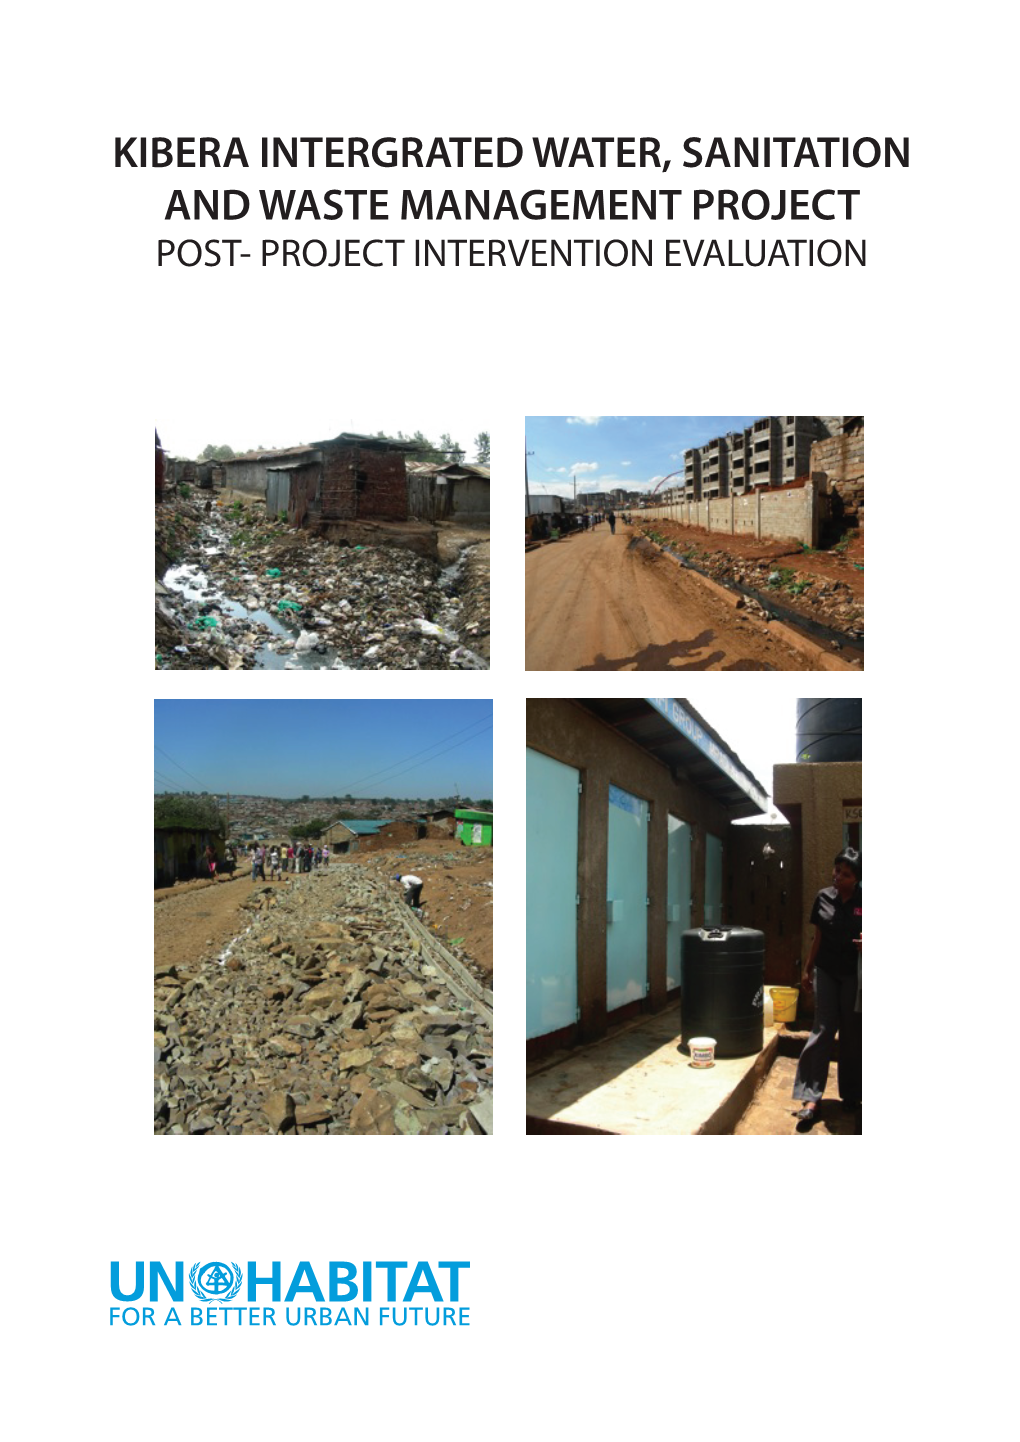 Evaluation of Kibera Water, Sanitation and Waste Water Project